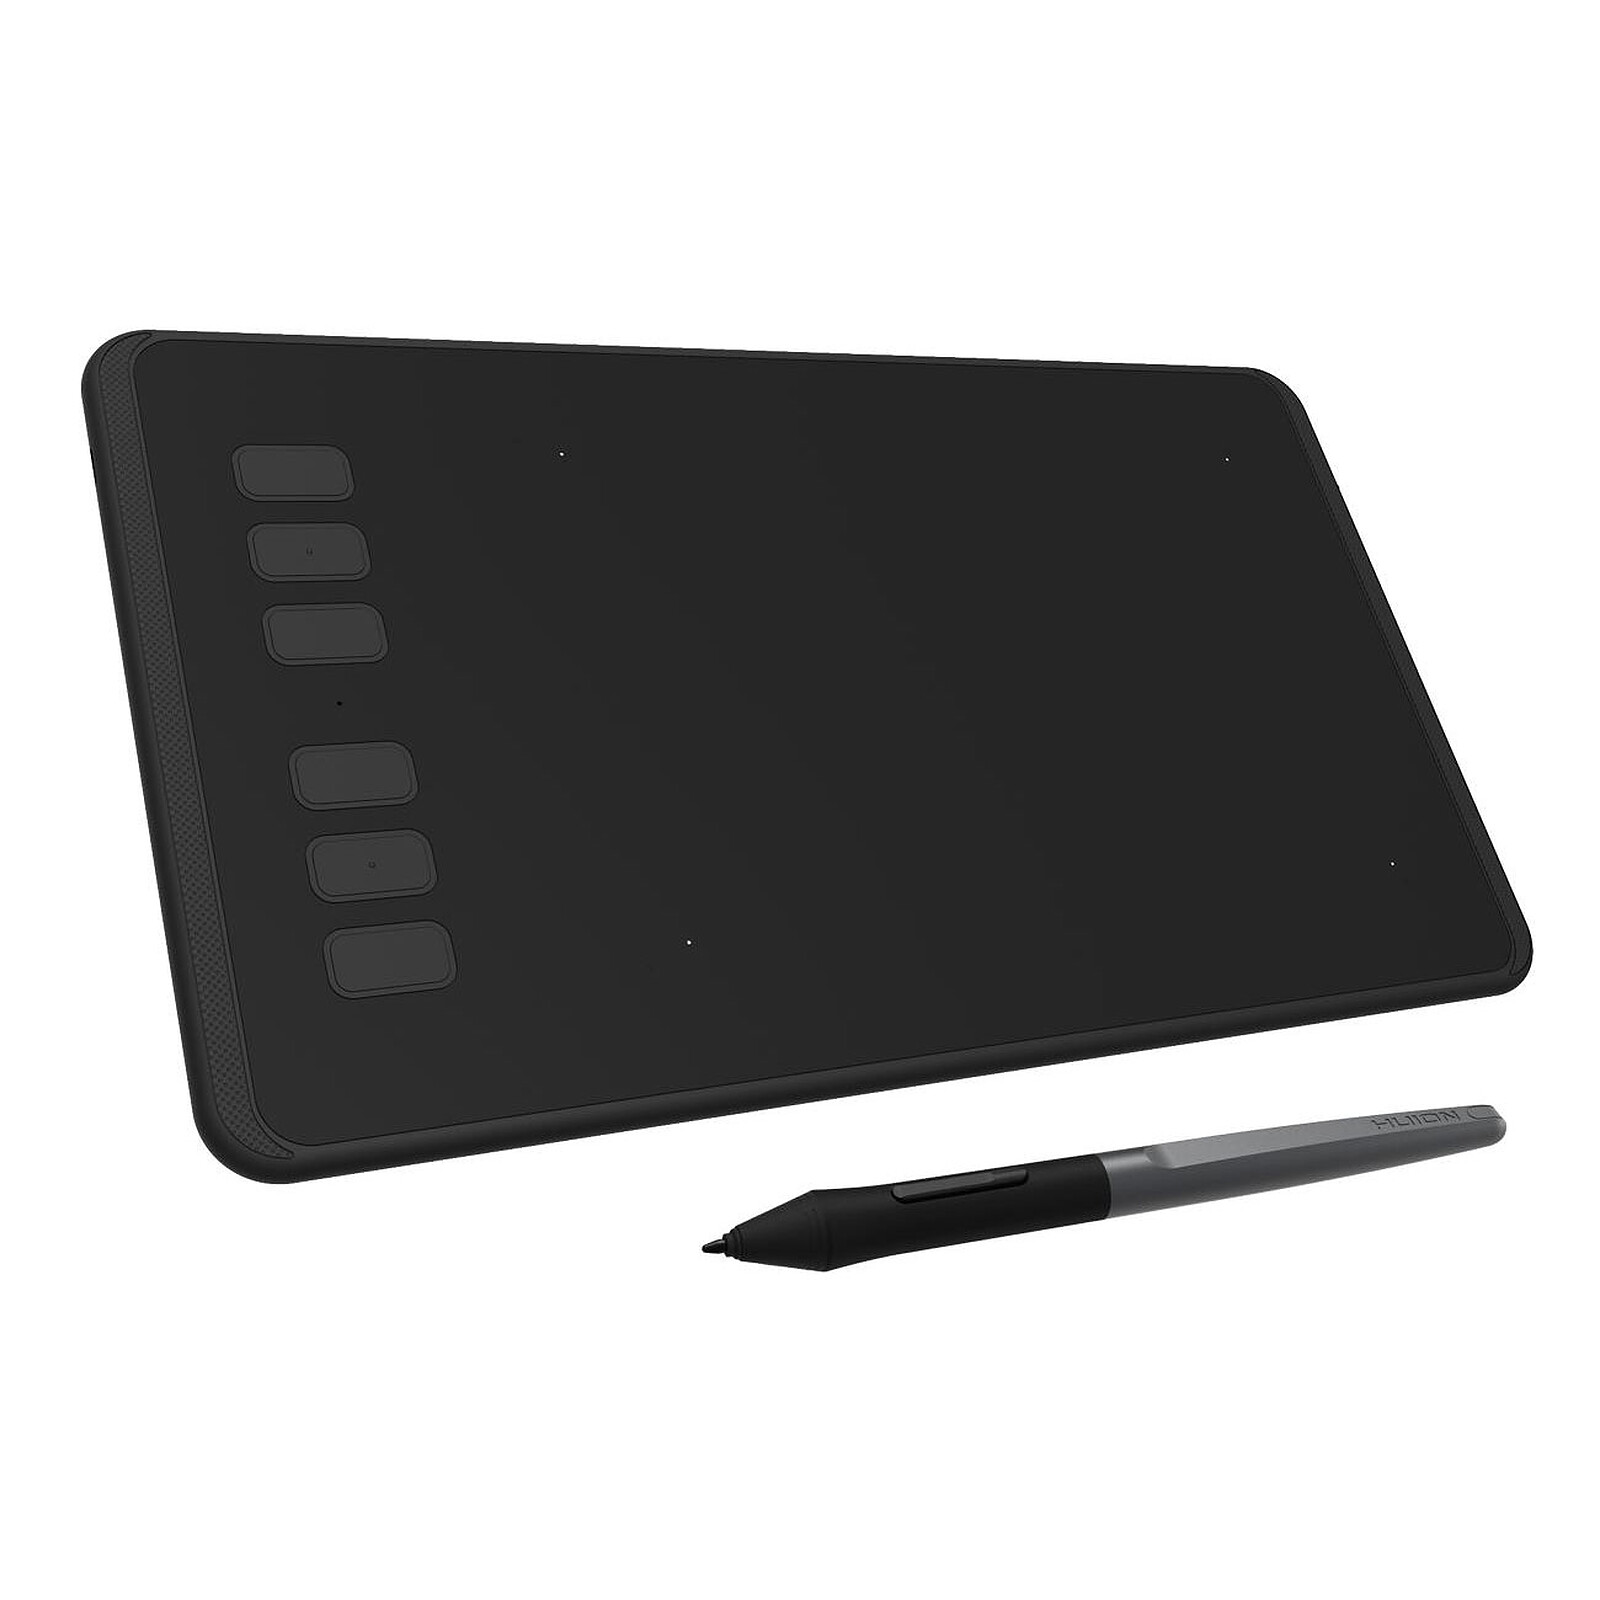 Xencelabs Drawing Tablet Medium, Wireless Graphic Drawing Tablet with 2 Battery-Free Digital Pen, 8192 Levels Pen Pressure Sensitivity for Win/ Mac/